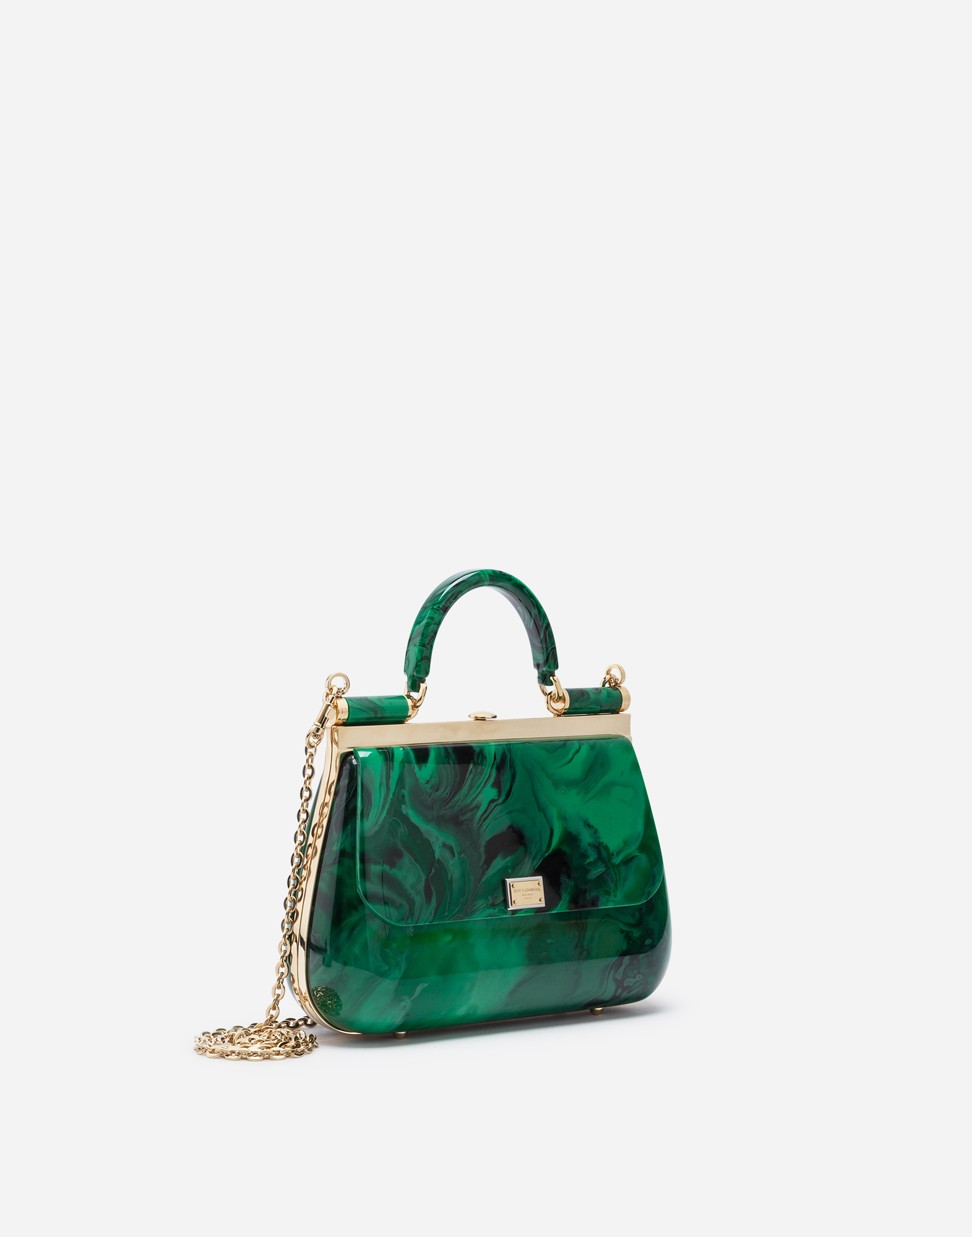 Small holdings: the tiny handbags that became a big thing